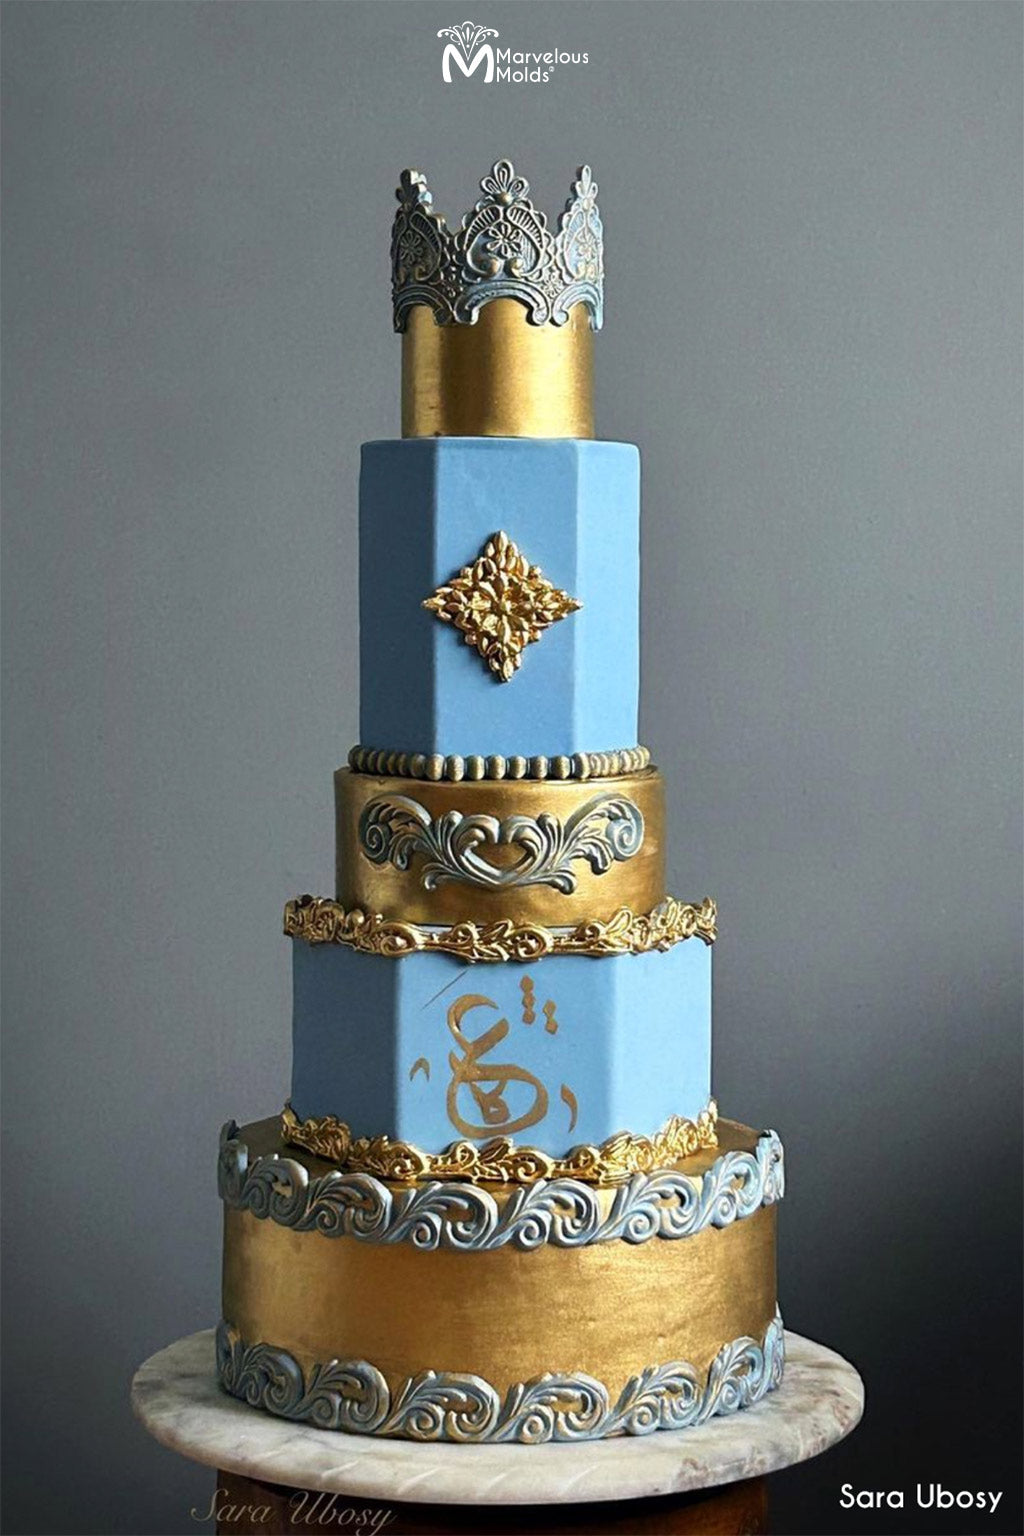 Gold Embellished Baroque Birthday Cake Decorated Using the Marvelous Molds Kelly Lace Silicone Mold